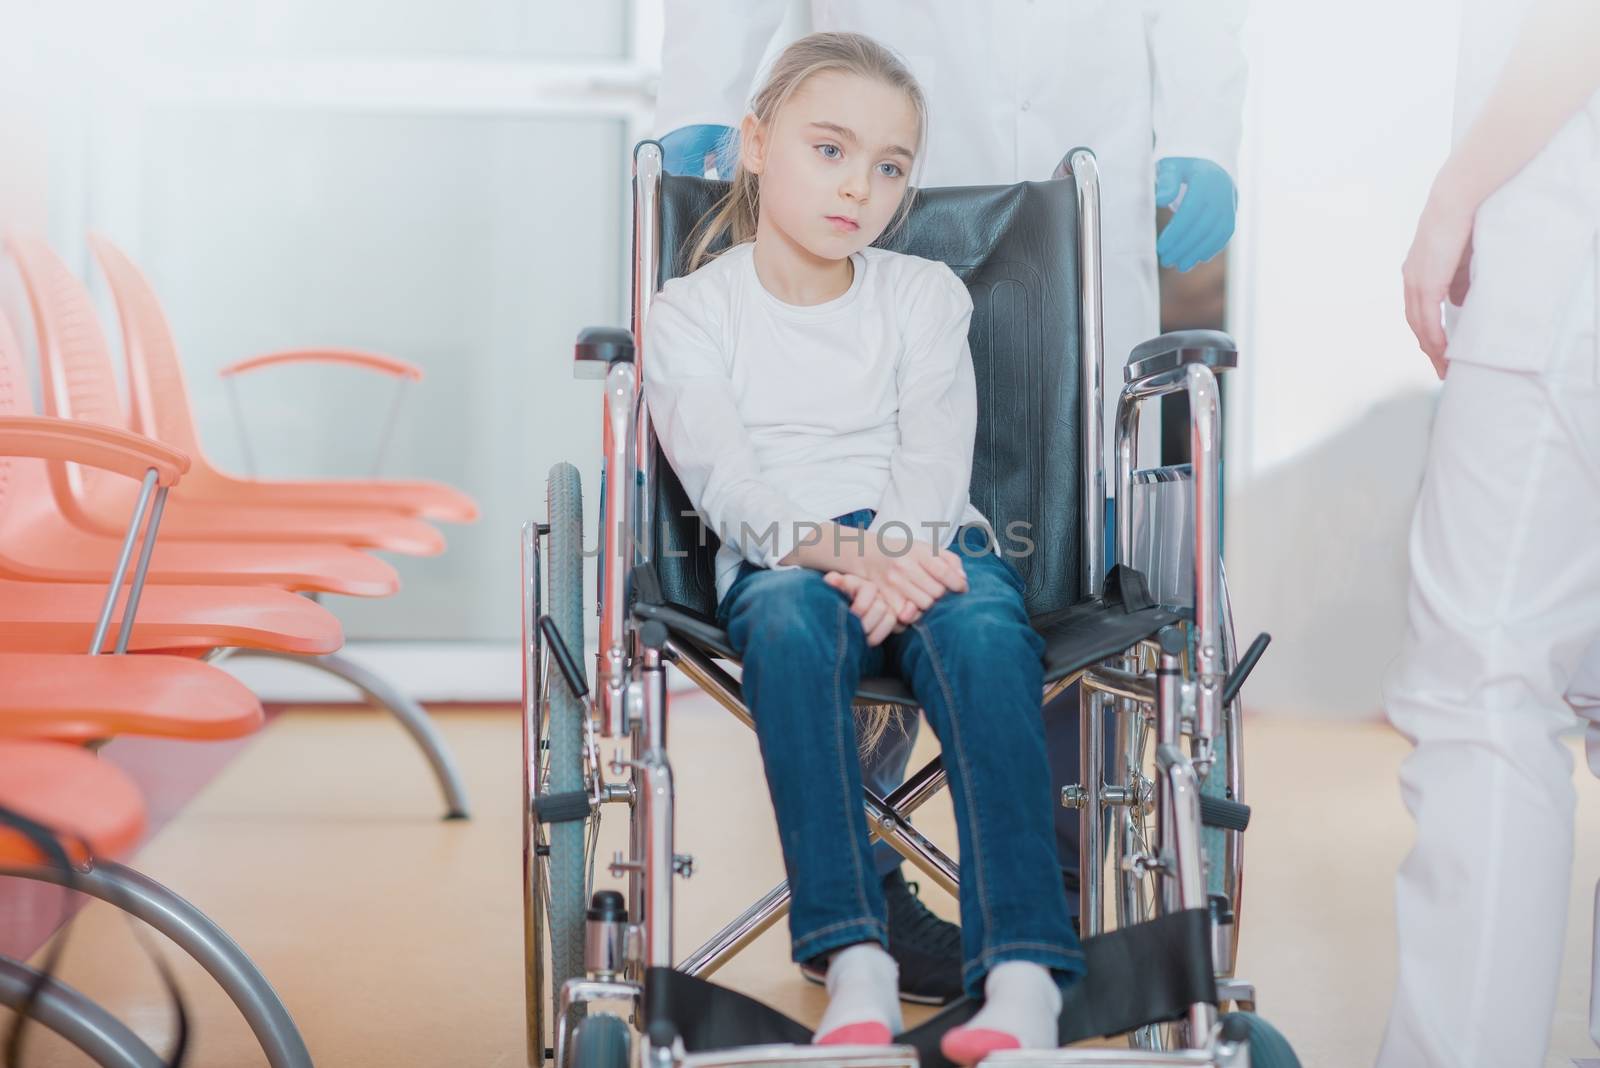 Wheelchair Disability in Children. Mobility Impairments. Young Caucasian Girl on the Wheelchair in the Hospital Hall with Physicians in the Background.